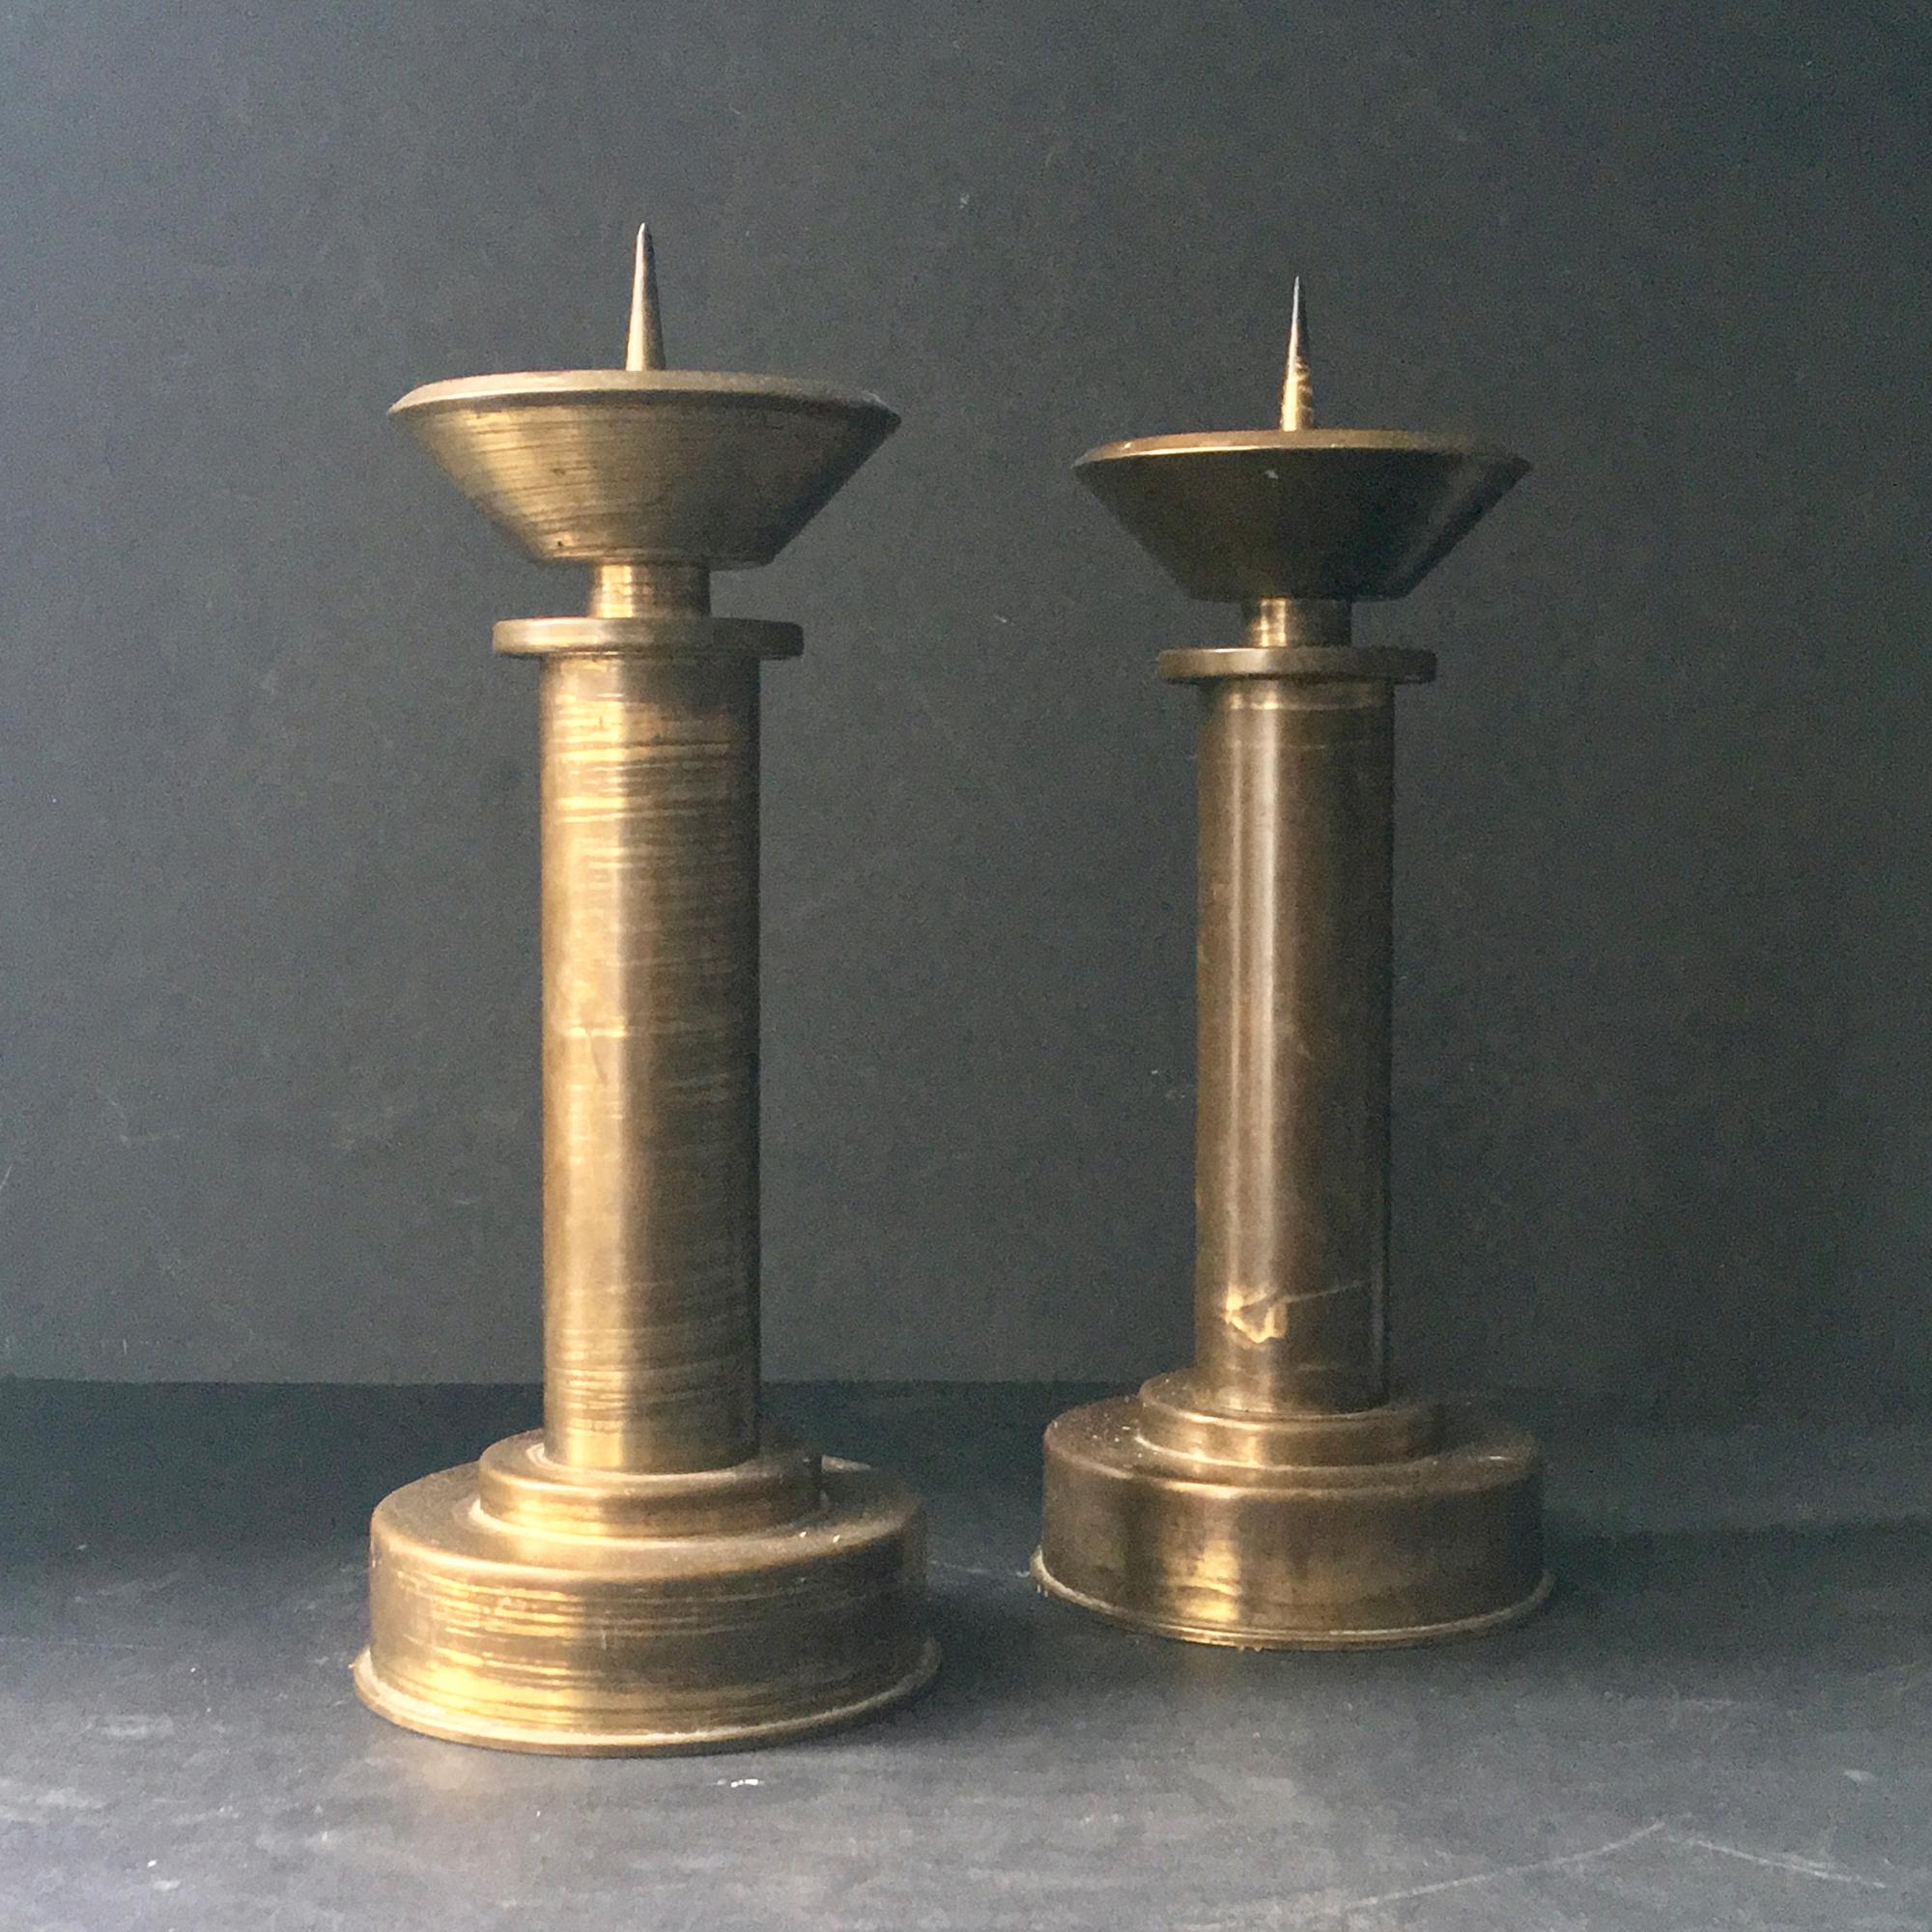 Pair of large Art Deco candlesticks in brass or bronze. German or Austrian, early to mid-20th century, probably church candlesticks.

Good vintage condition with nice aged patina and some signs of wear including minor dents, scratches and traces